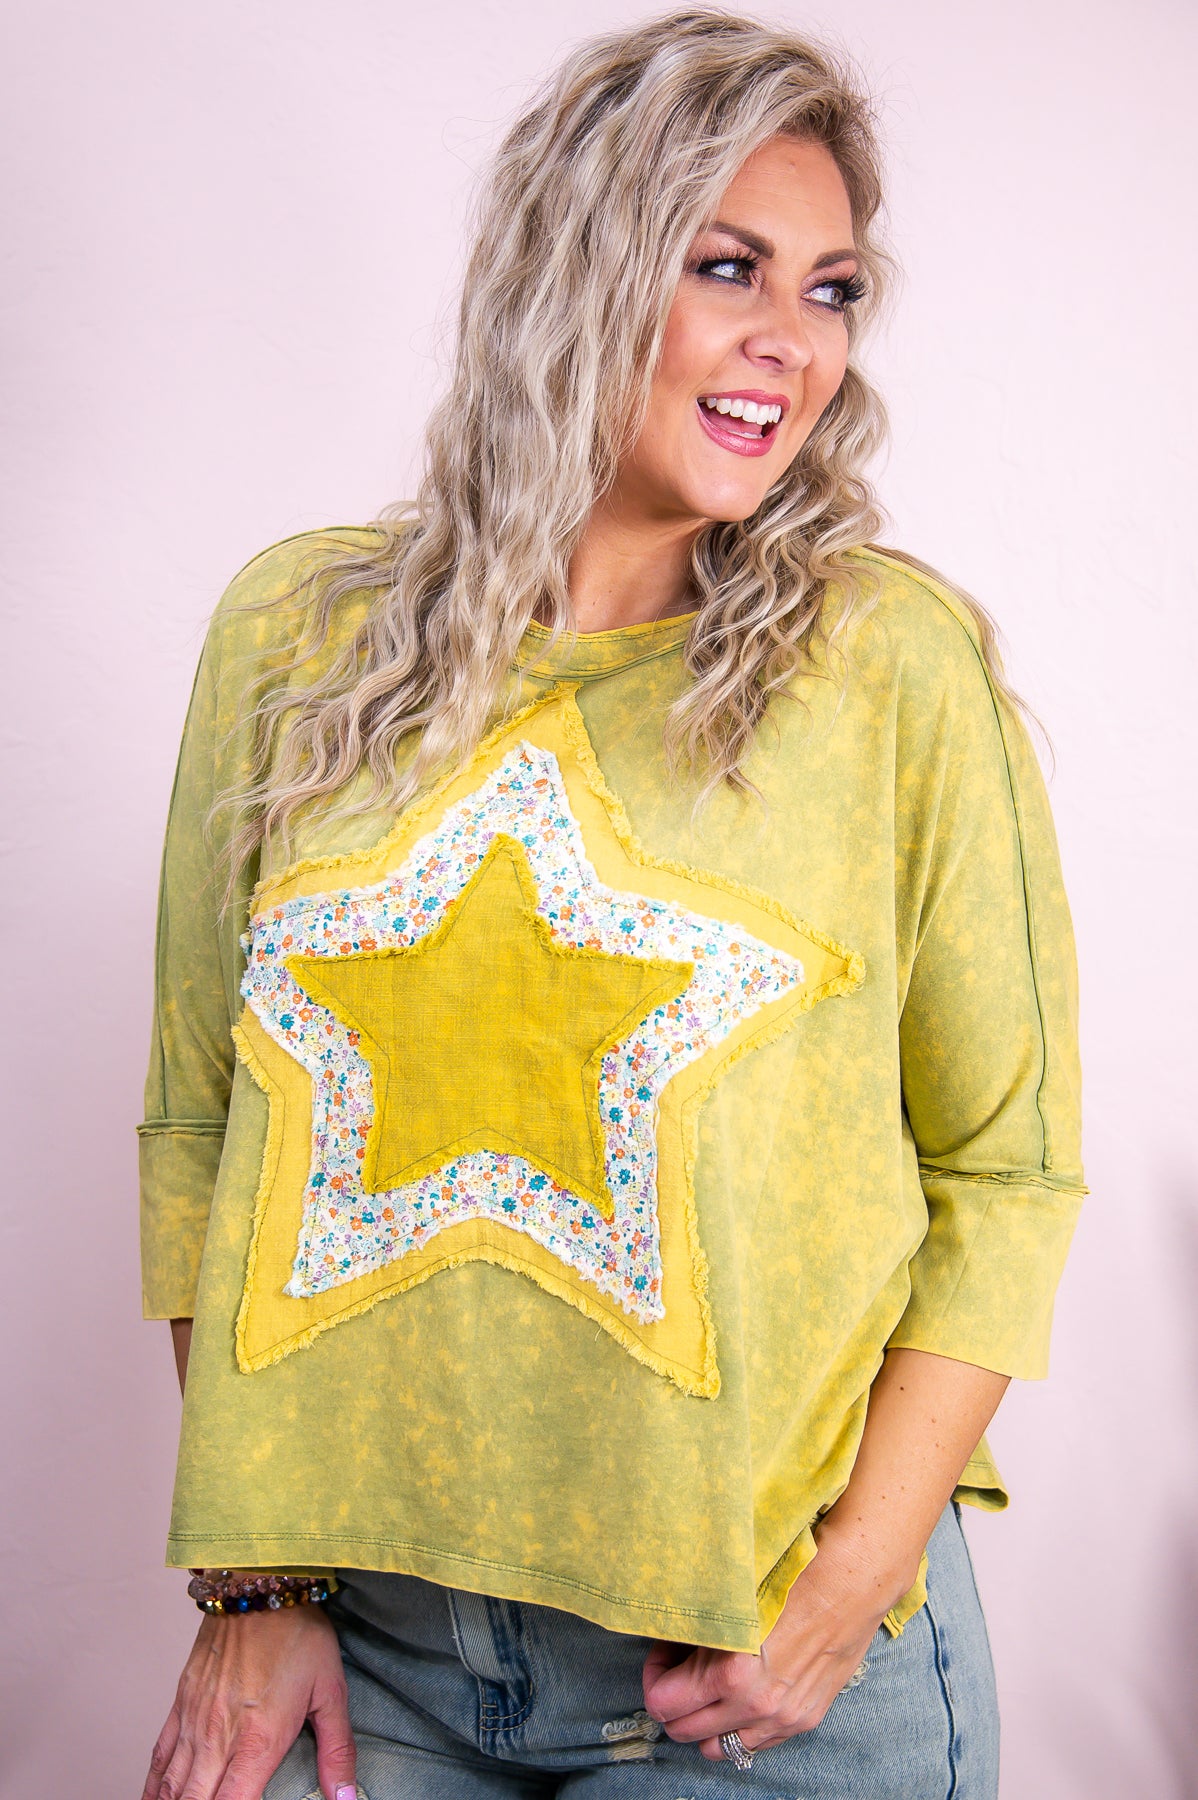 Ready To Shine Olive/Multi Color Floral/Star Patchwork Top - T9261OL